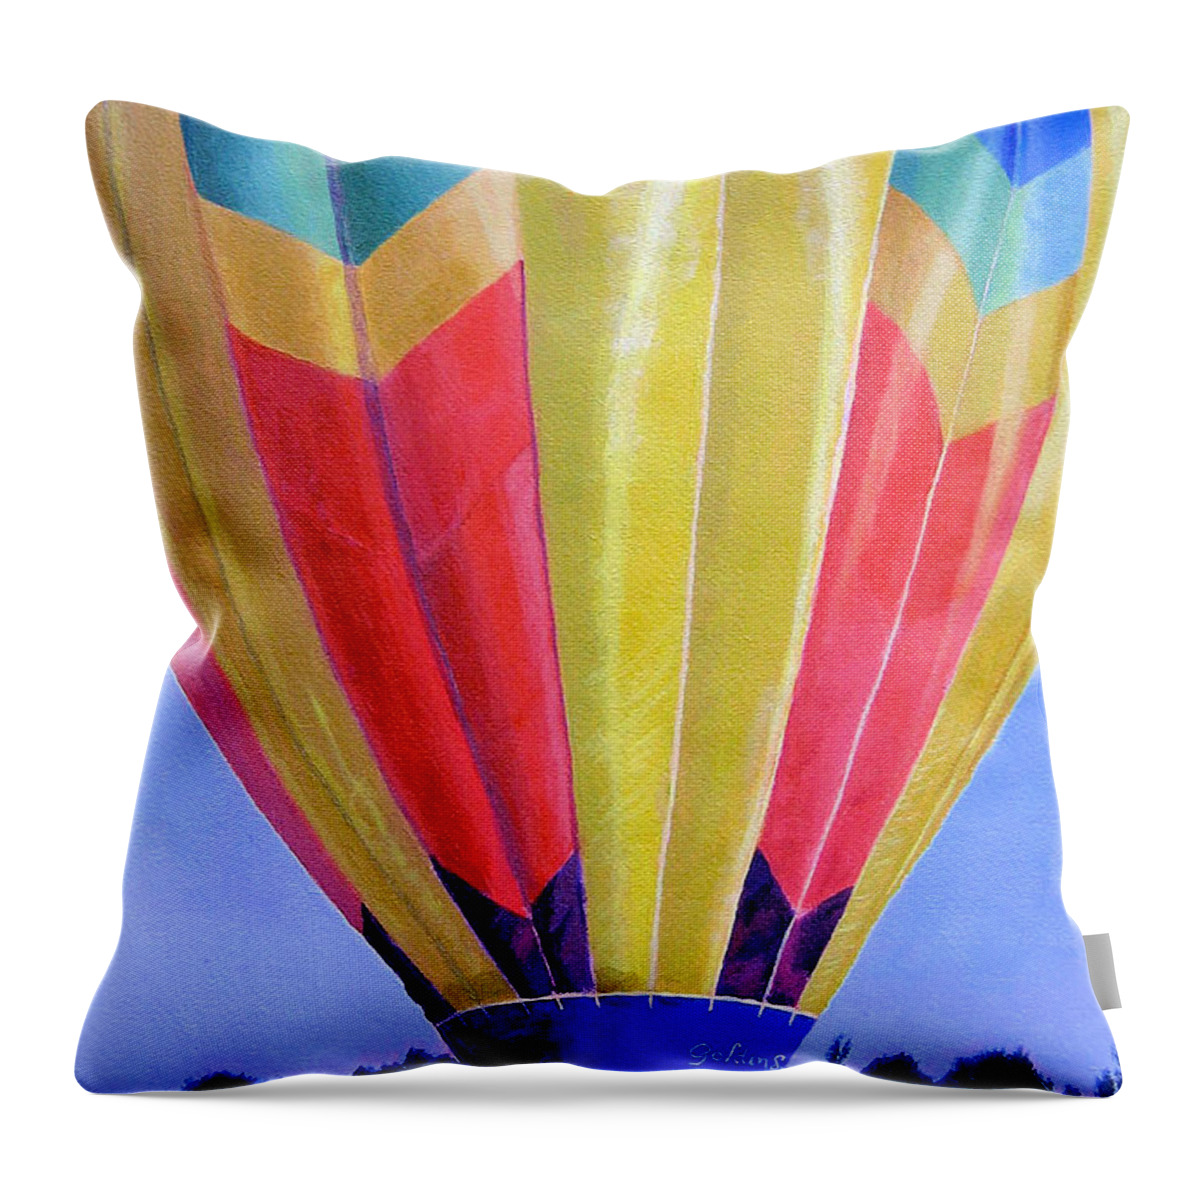 Acrylic Throw Pillow featuring the painting Morning Flight by Lynne Reichhart